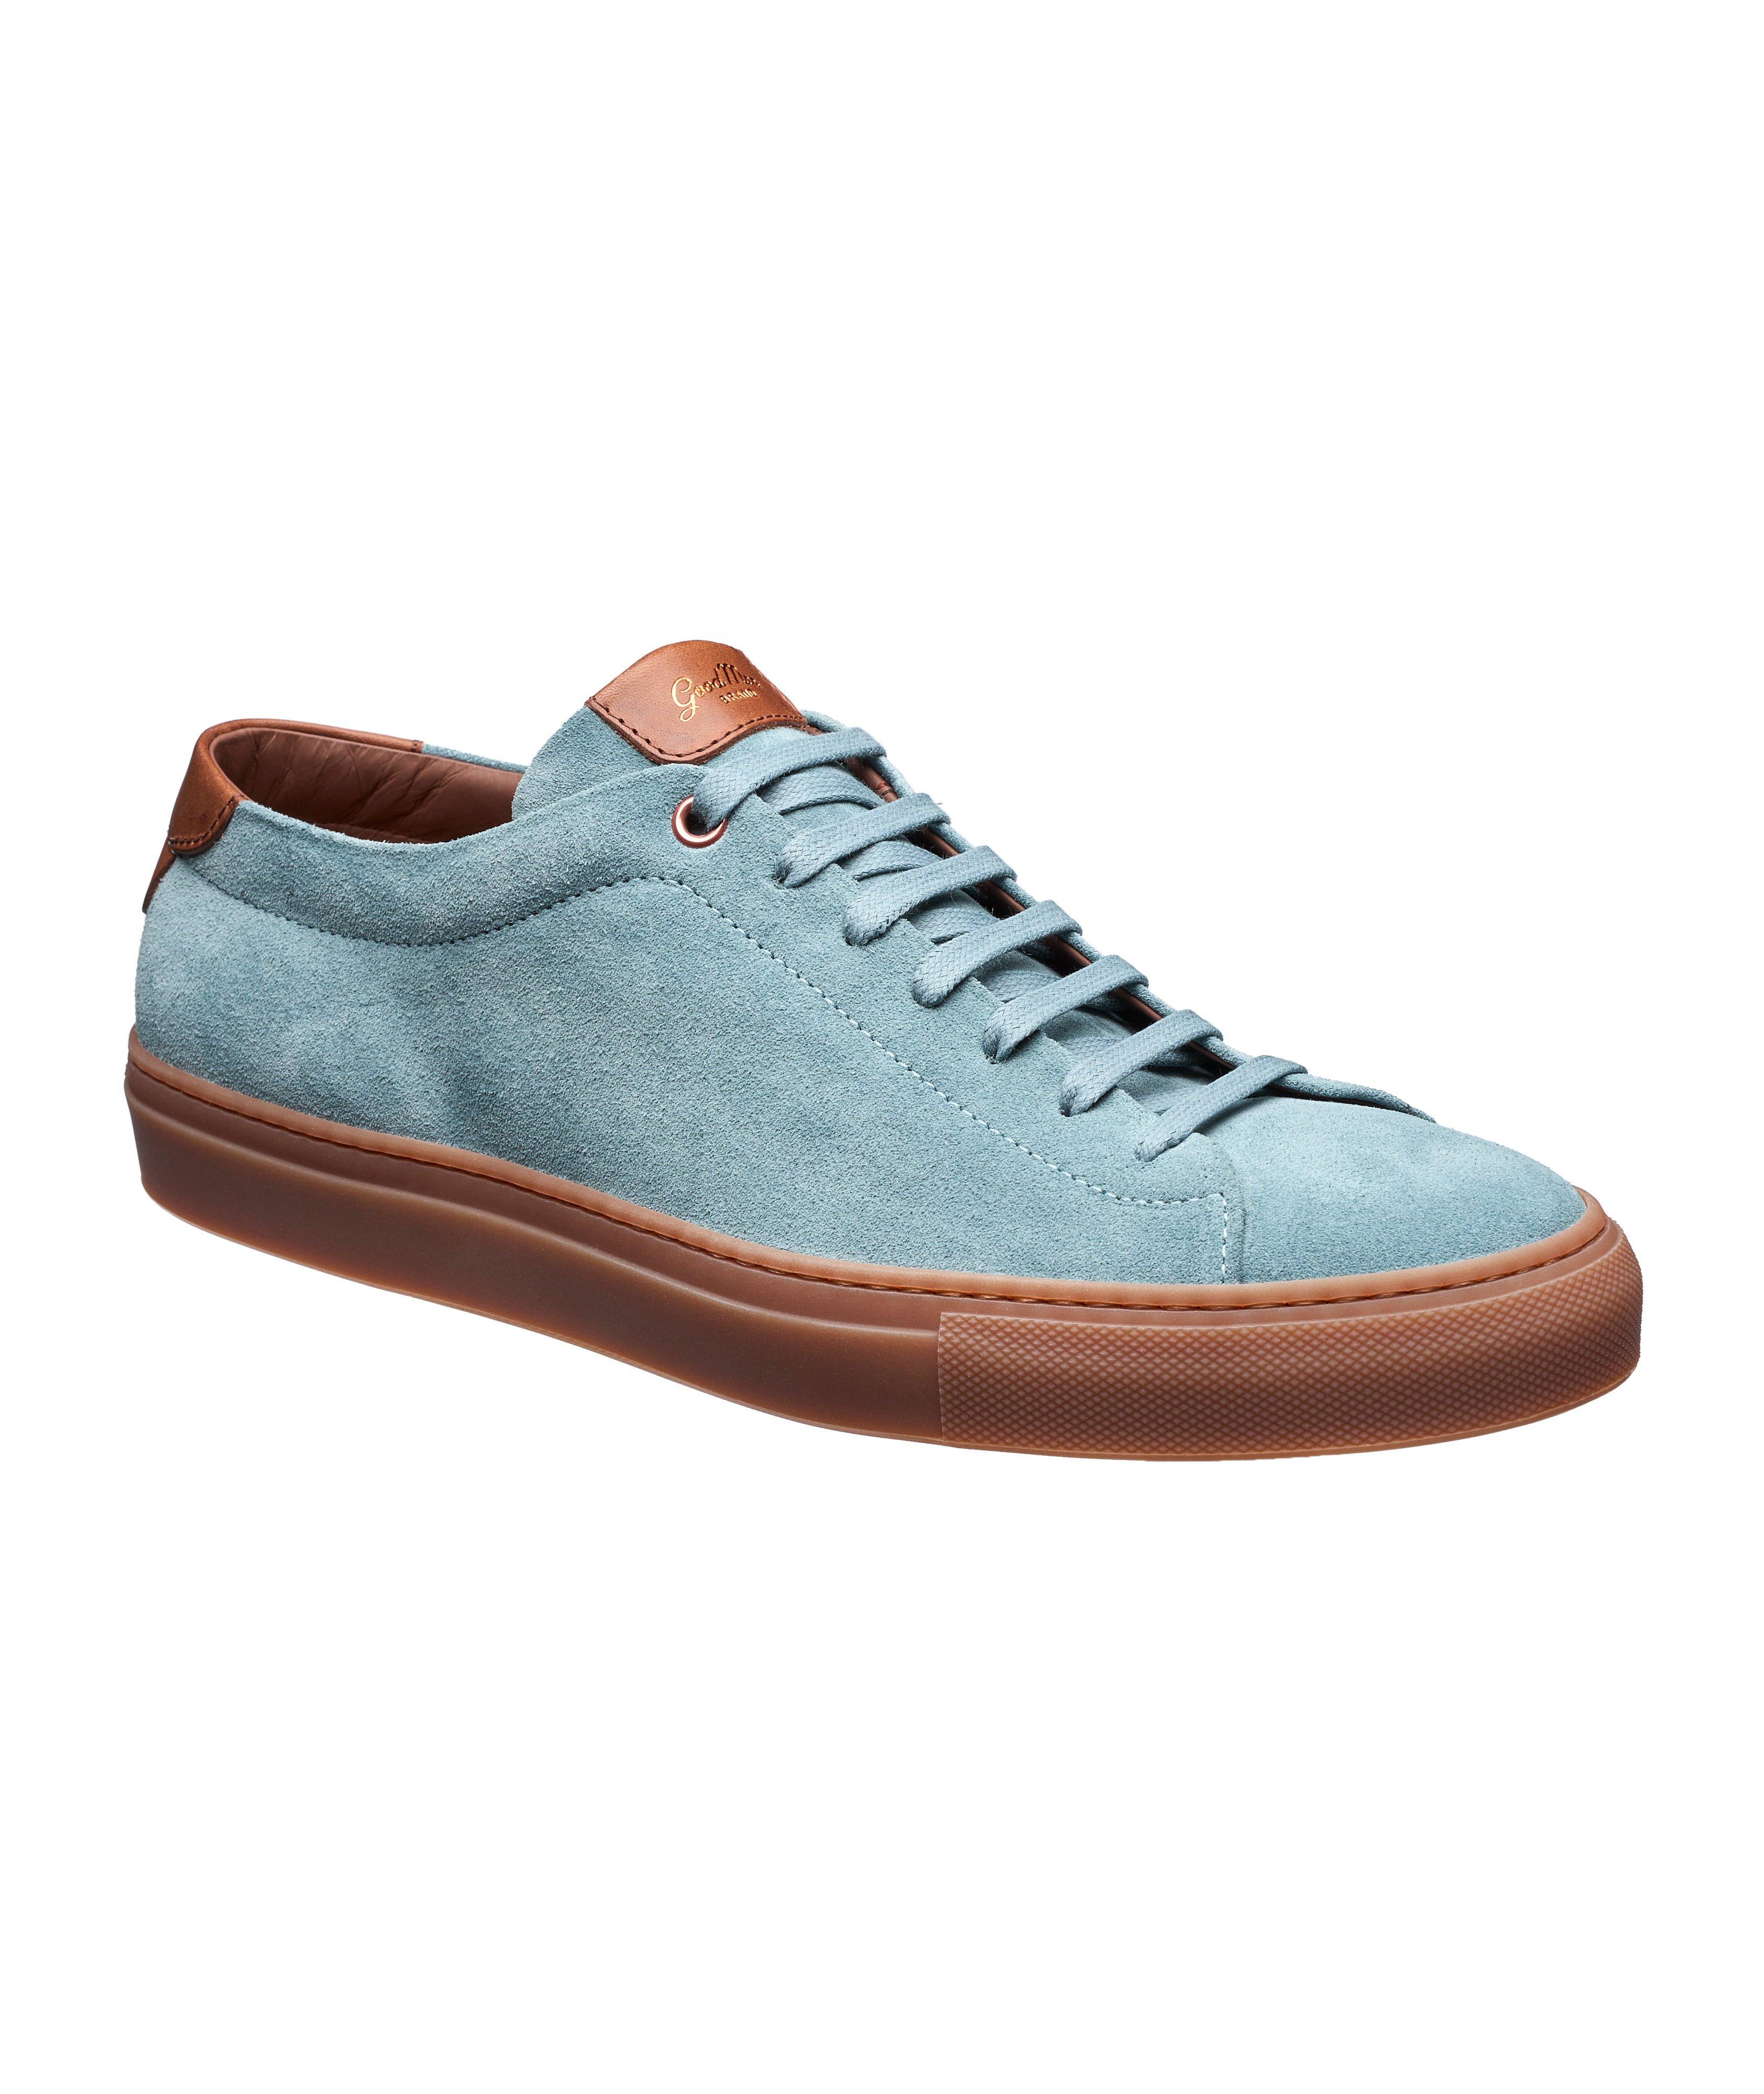 Edge Leather Sneakers image 0